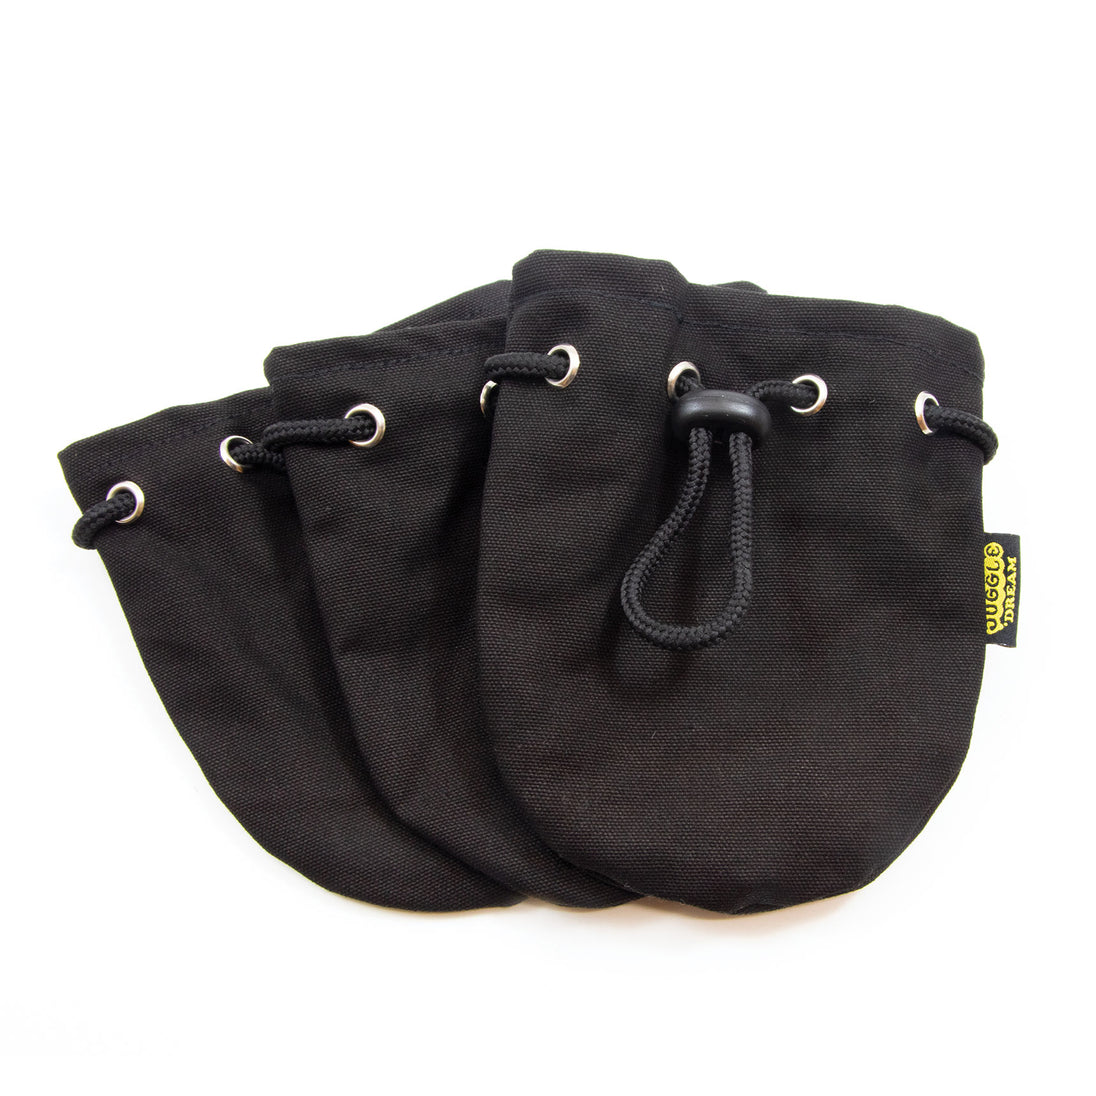 Three Contact Ball Bags Pouch